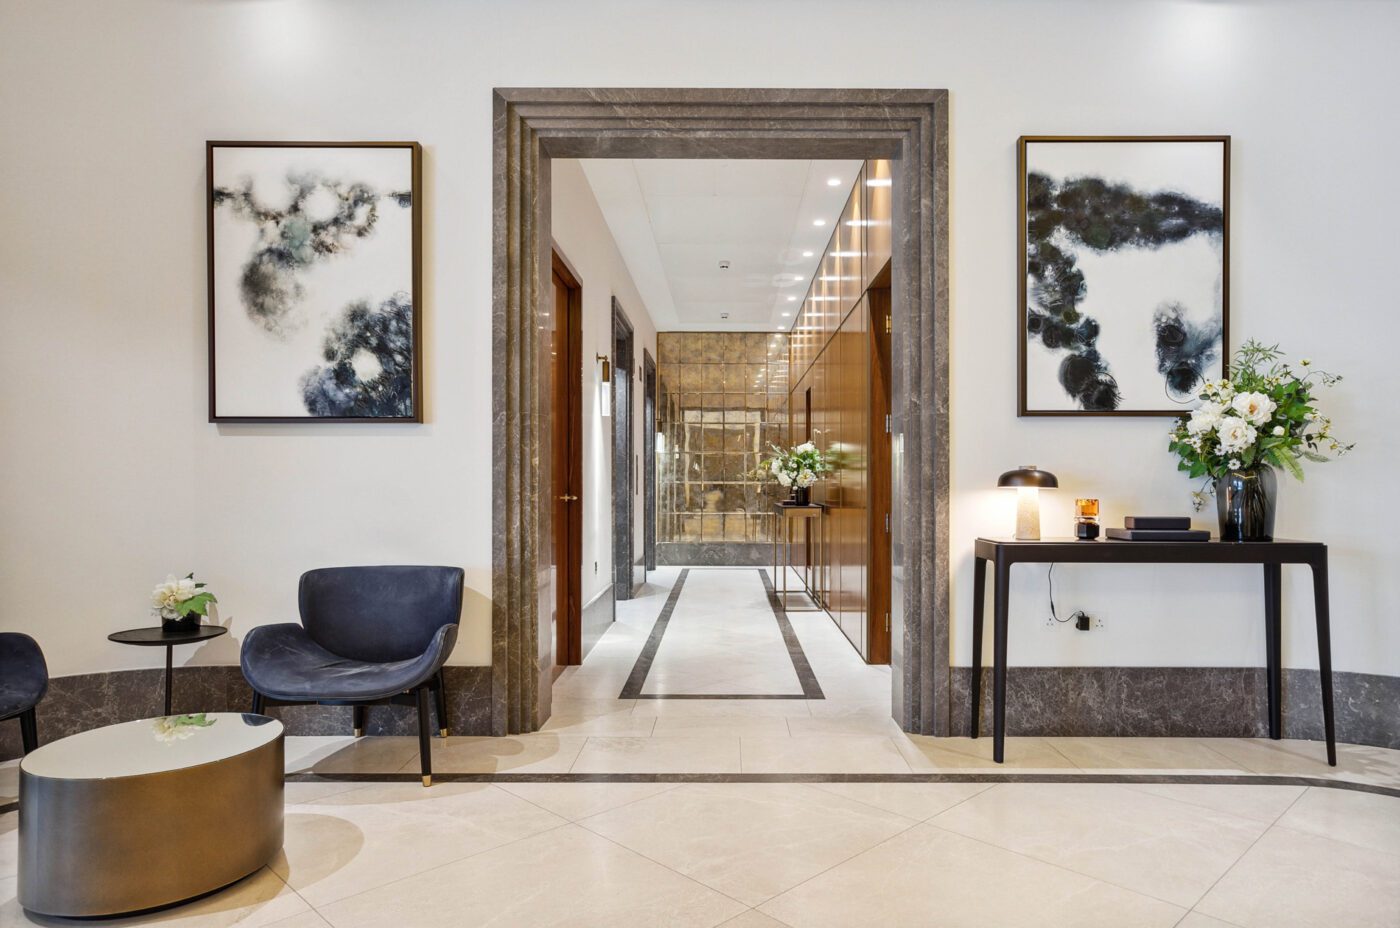 The lobby area and hallway of a luxury apartment in london which was sourced as a property for investment